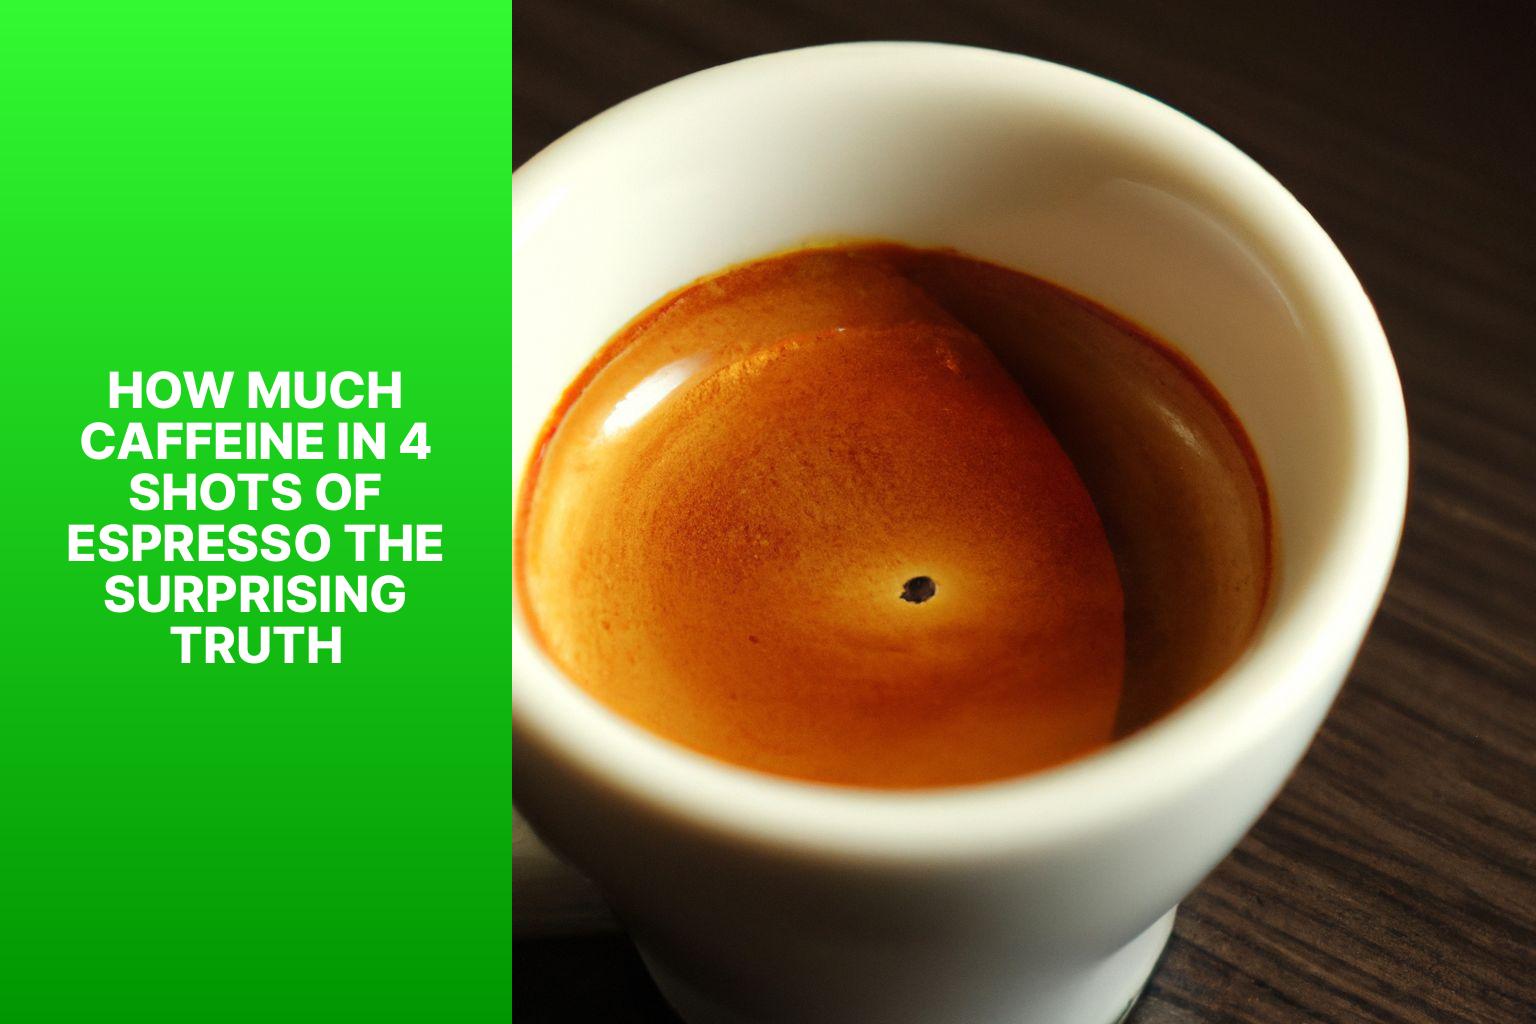 How Much Caffeine in 4 Shots of Espresso? The Surprising Truth